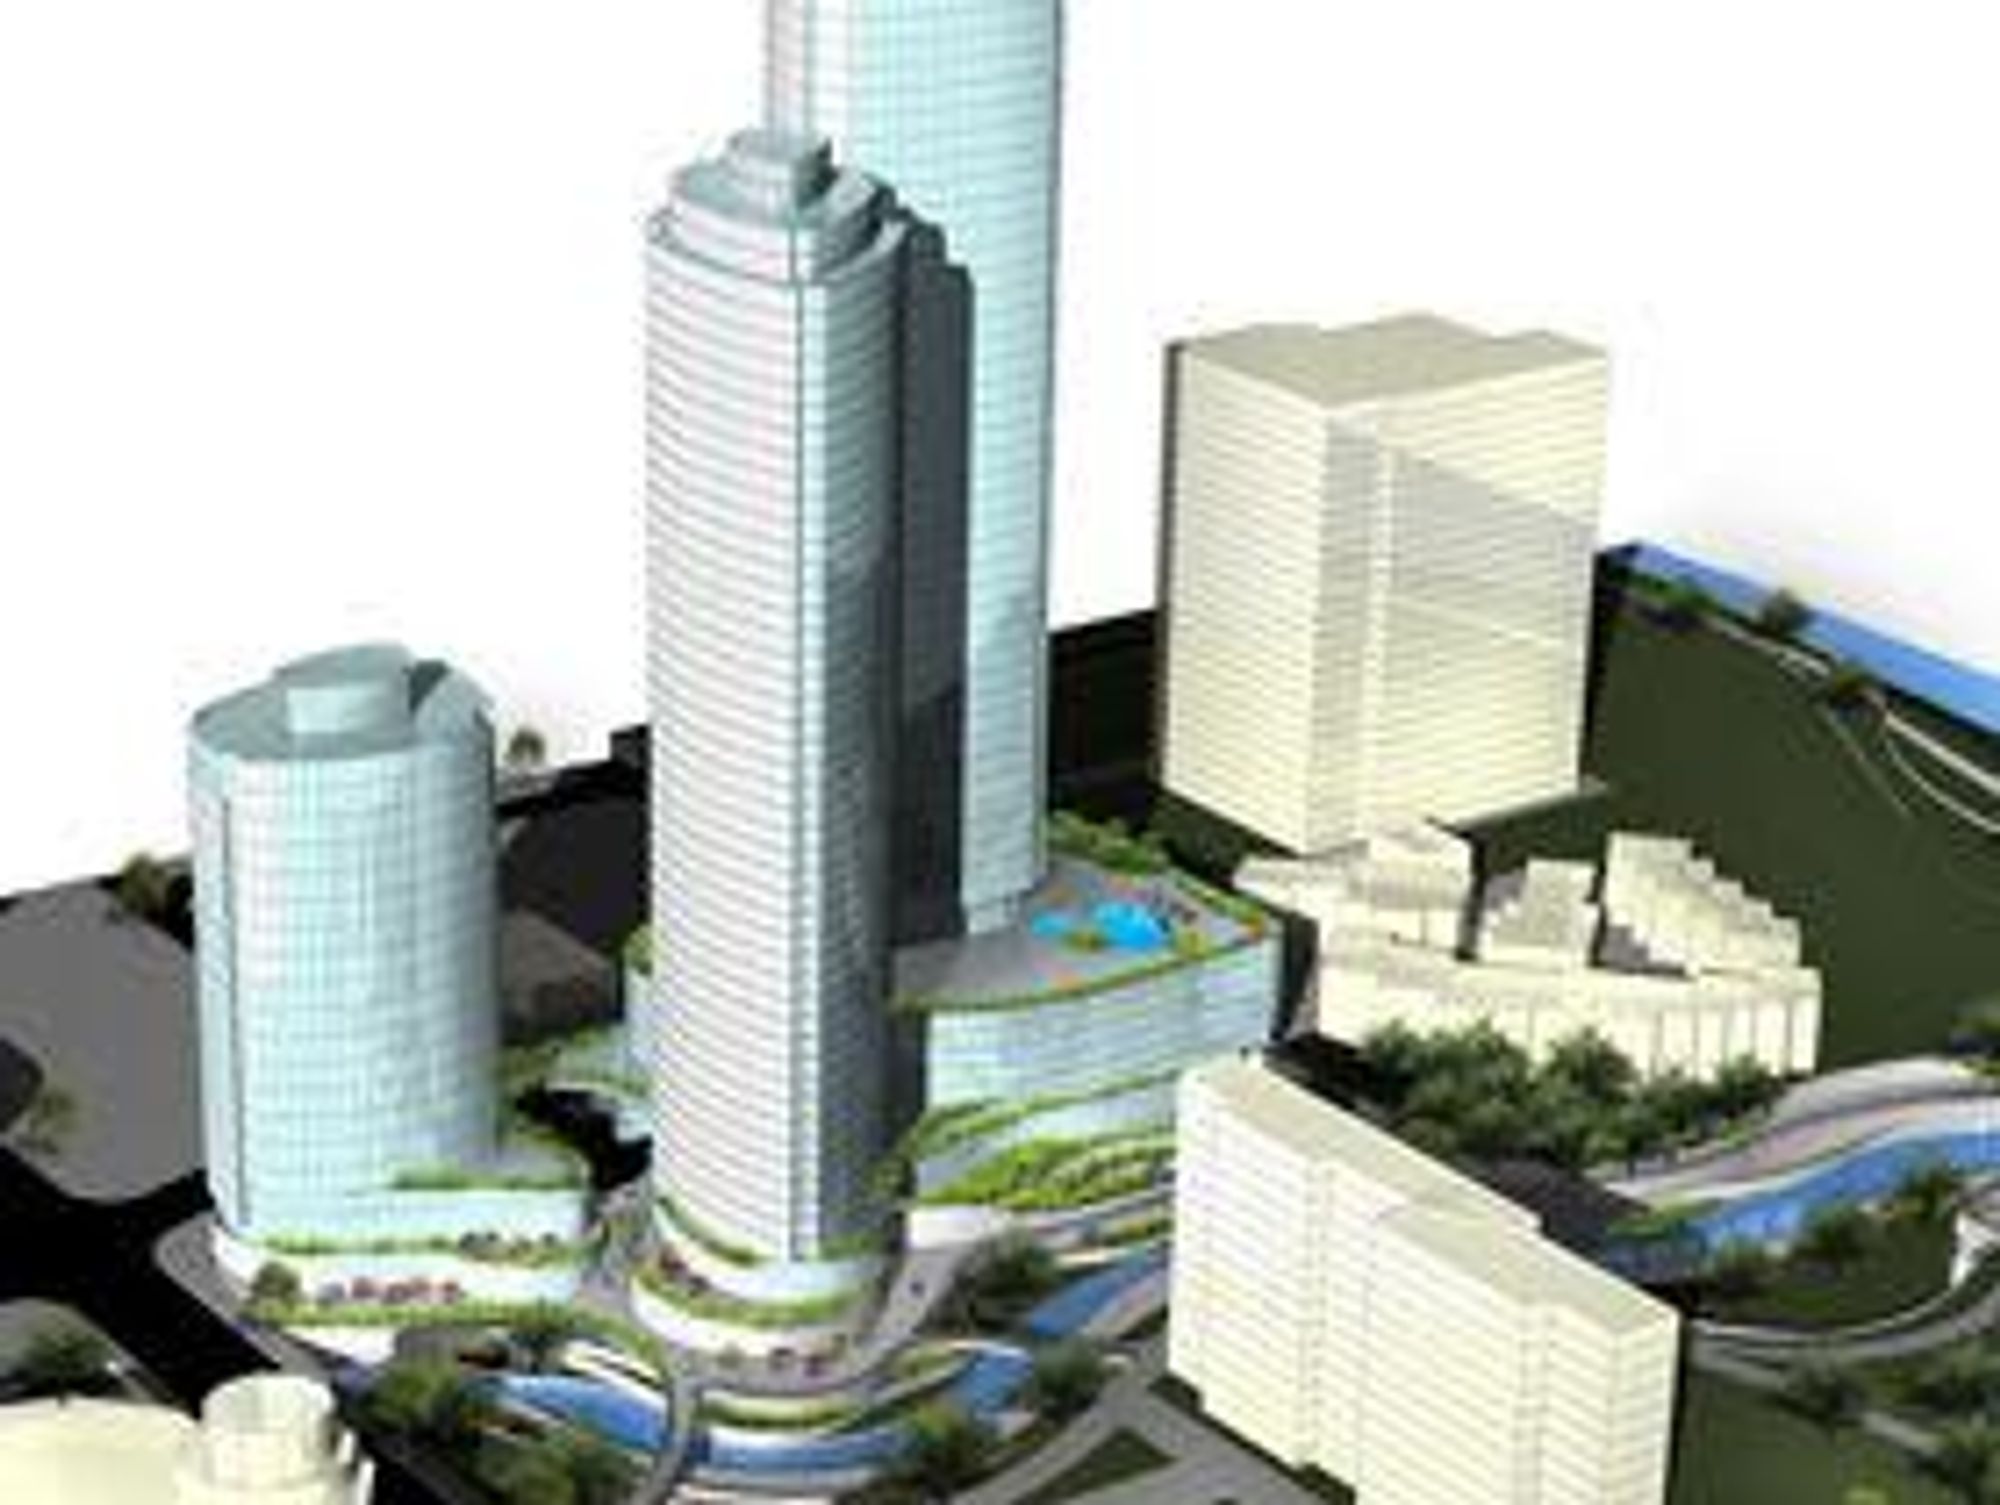 Three skyscrapers are proposed near Waller Creek